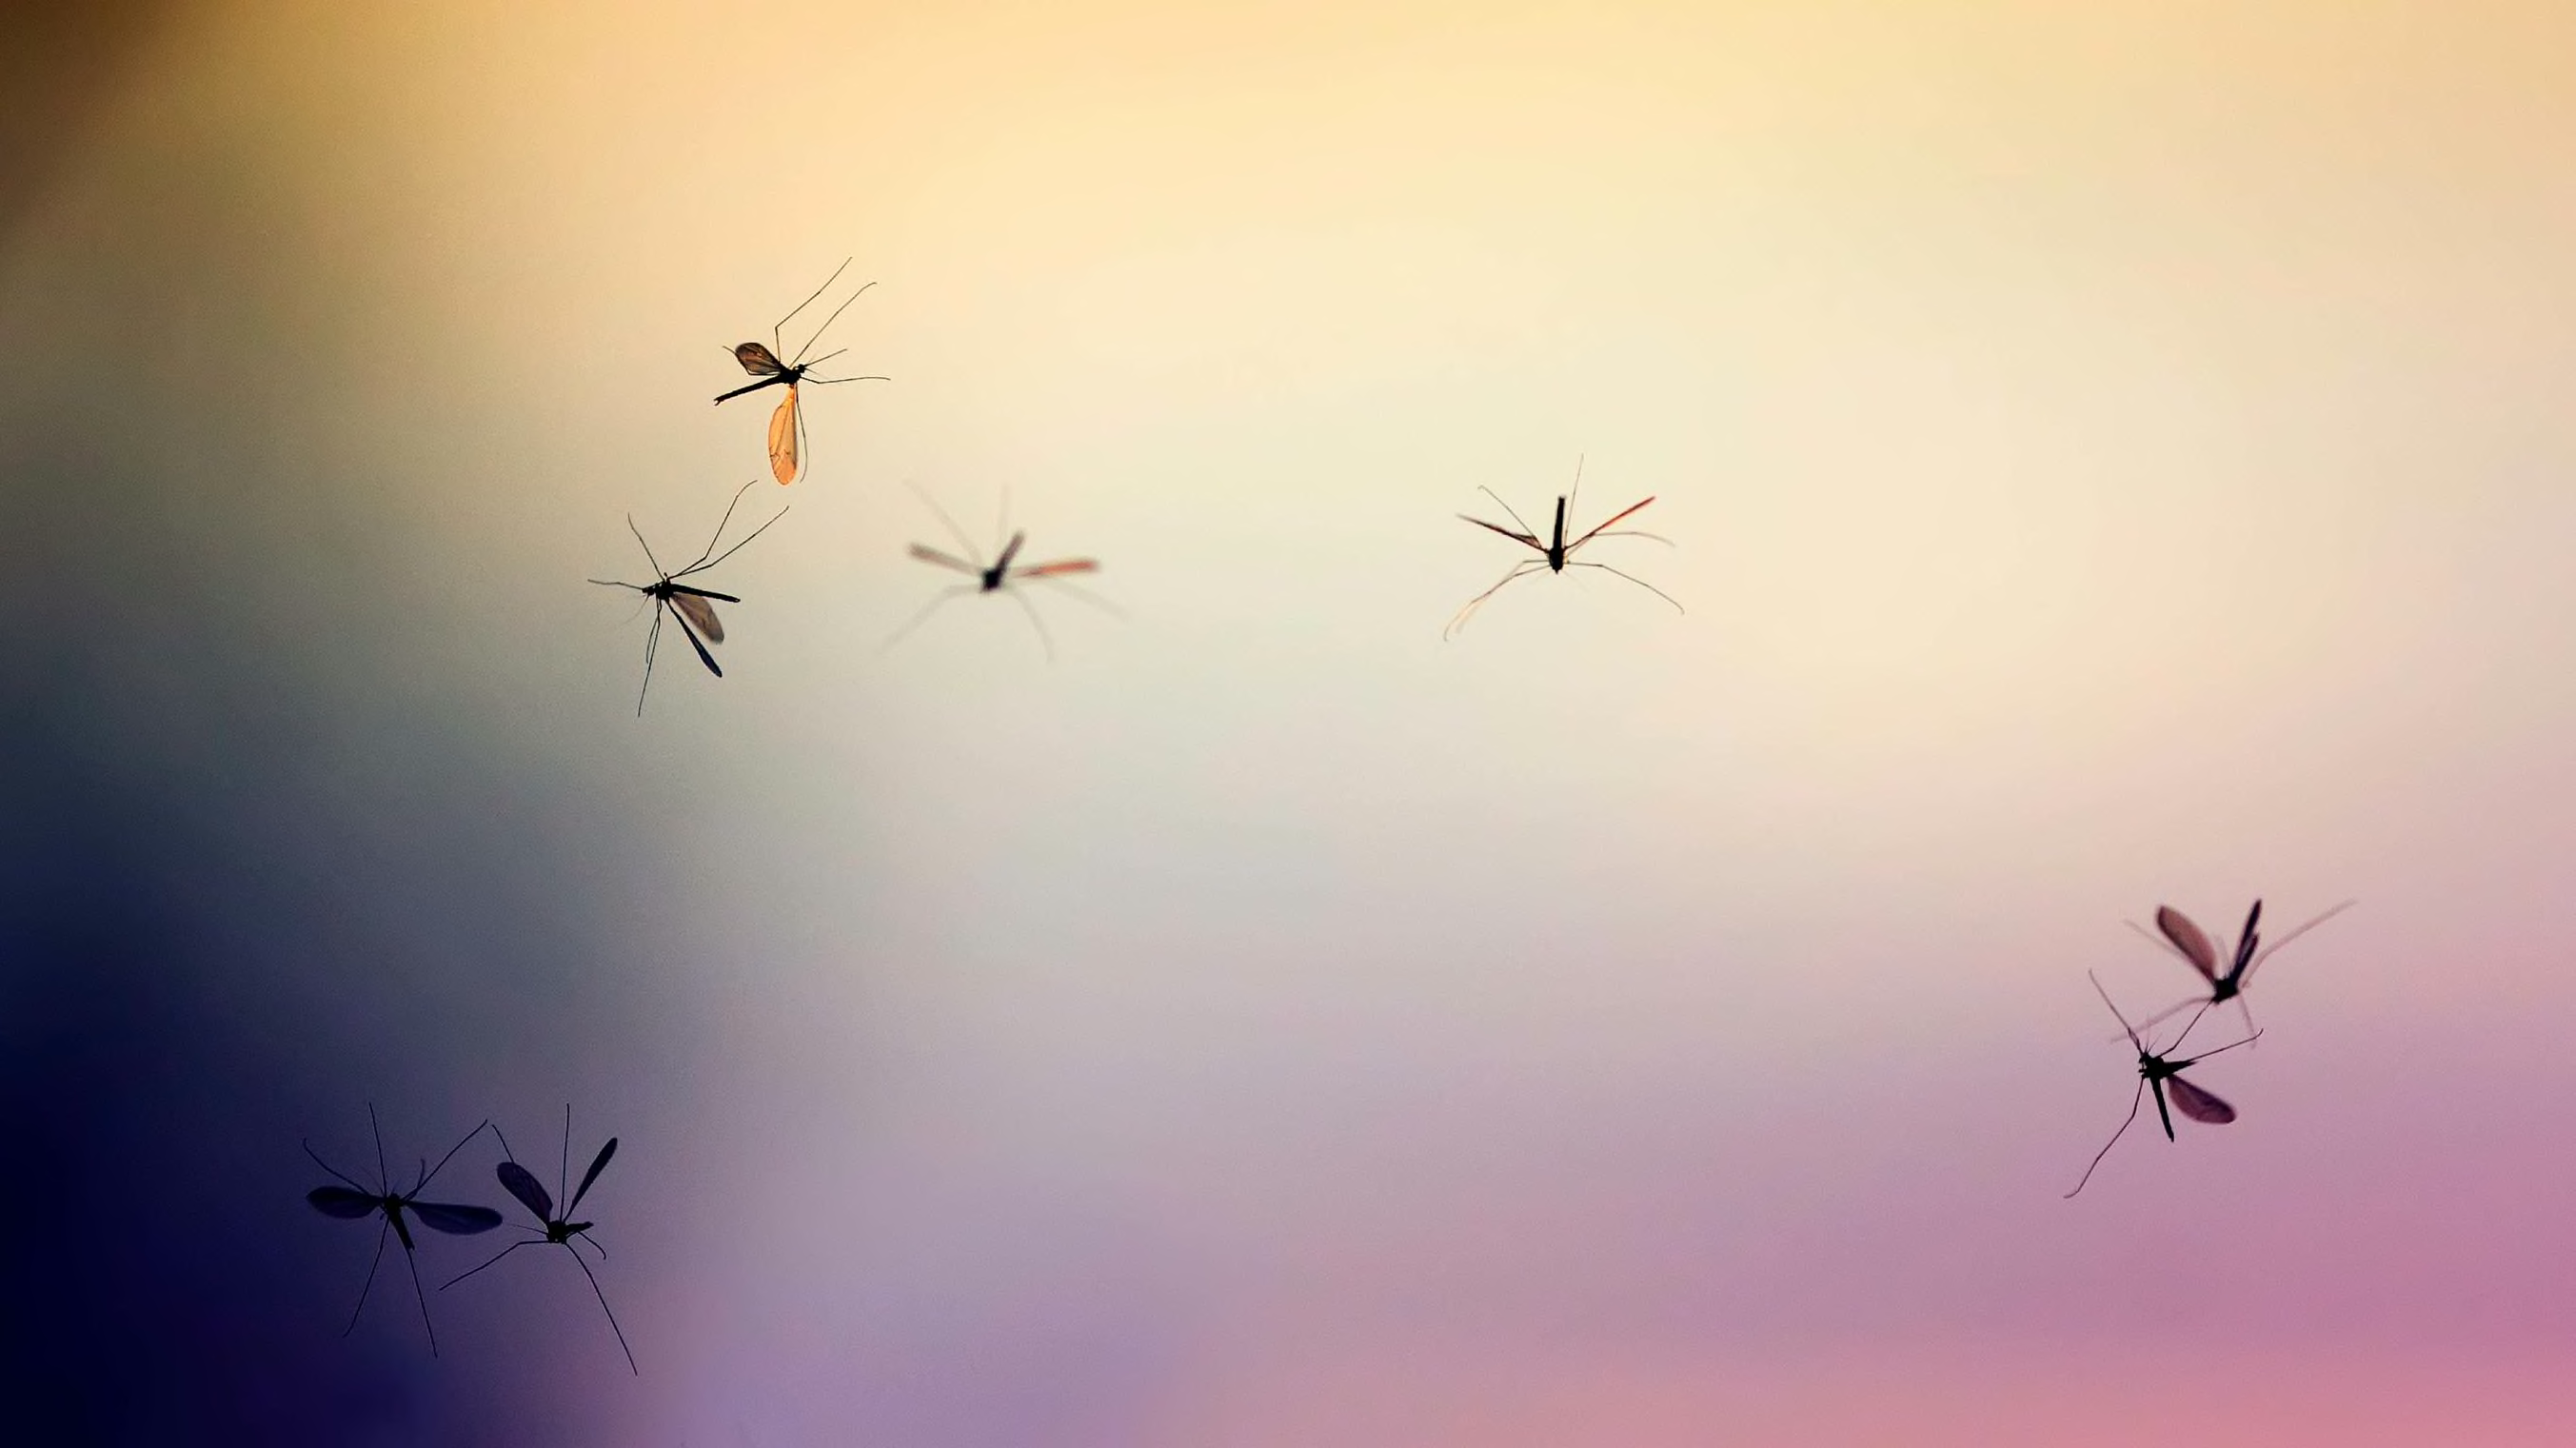 An image of several flying mosquitoes, potential vectors of West Nile virus.